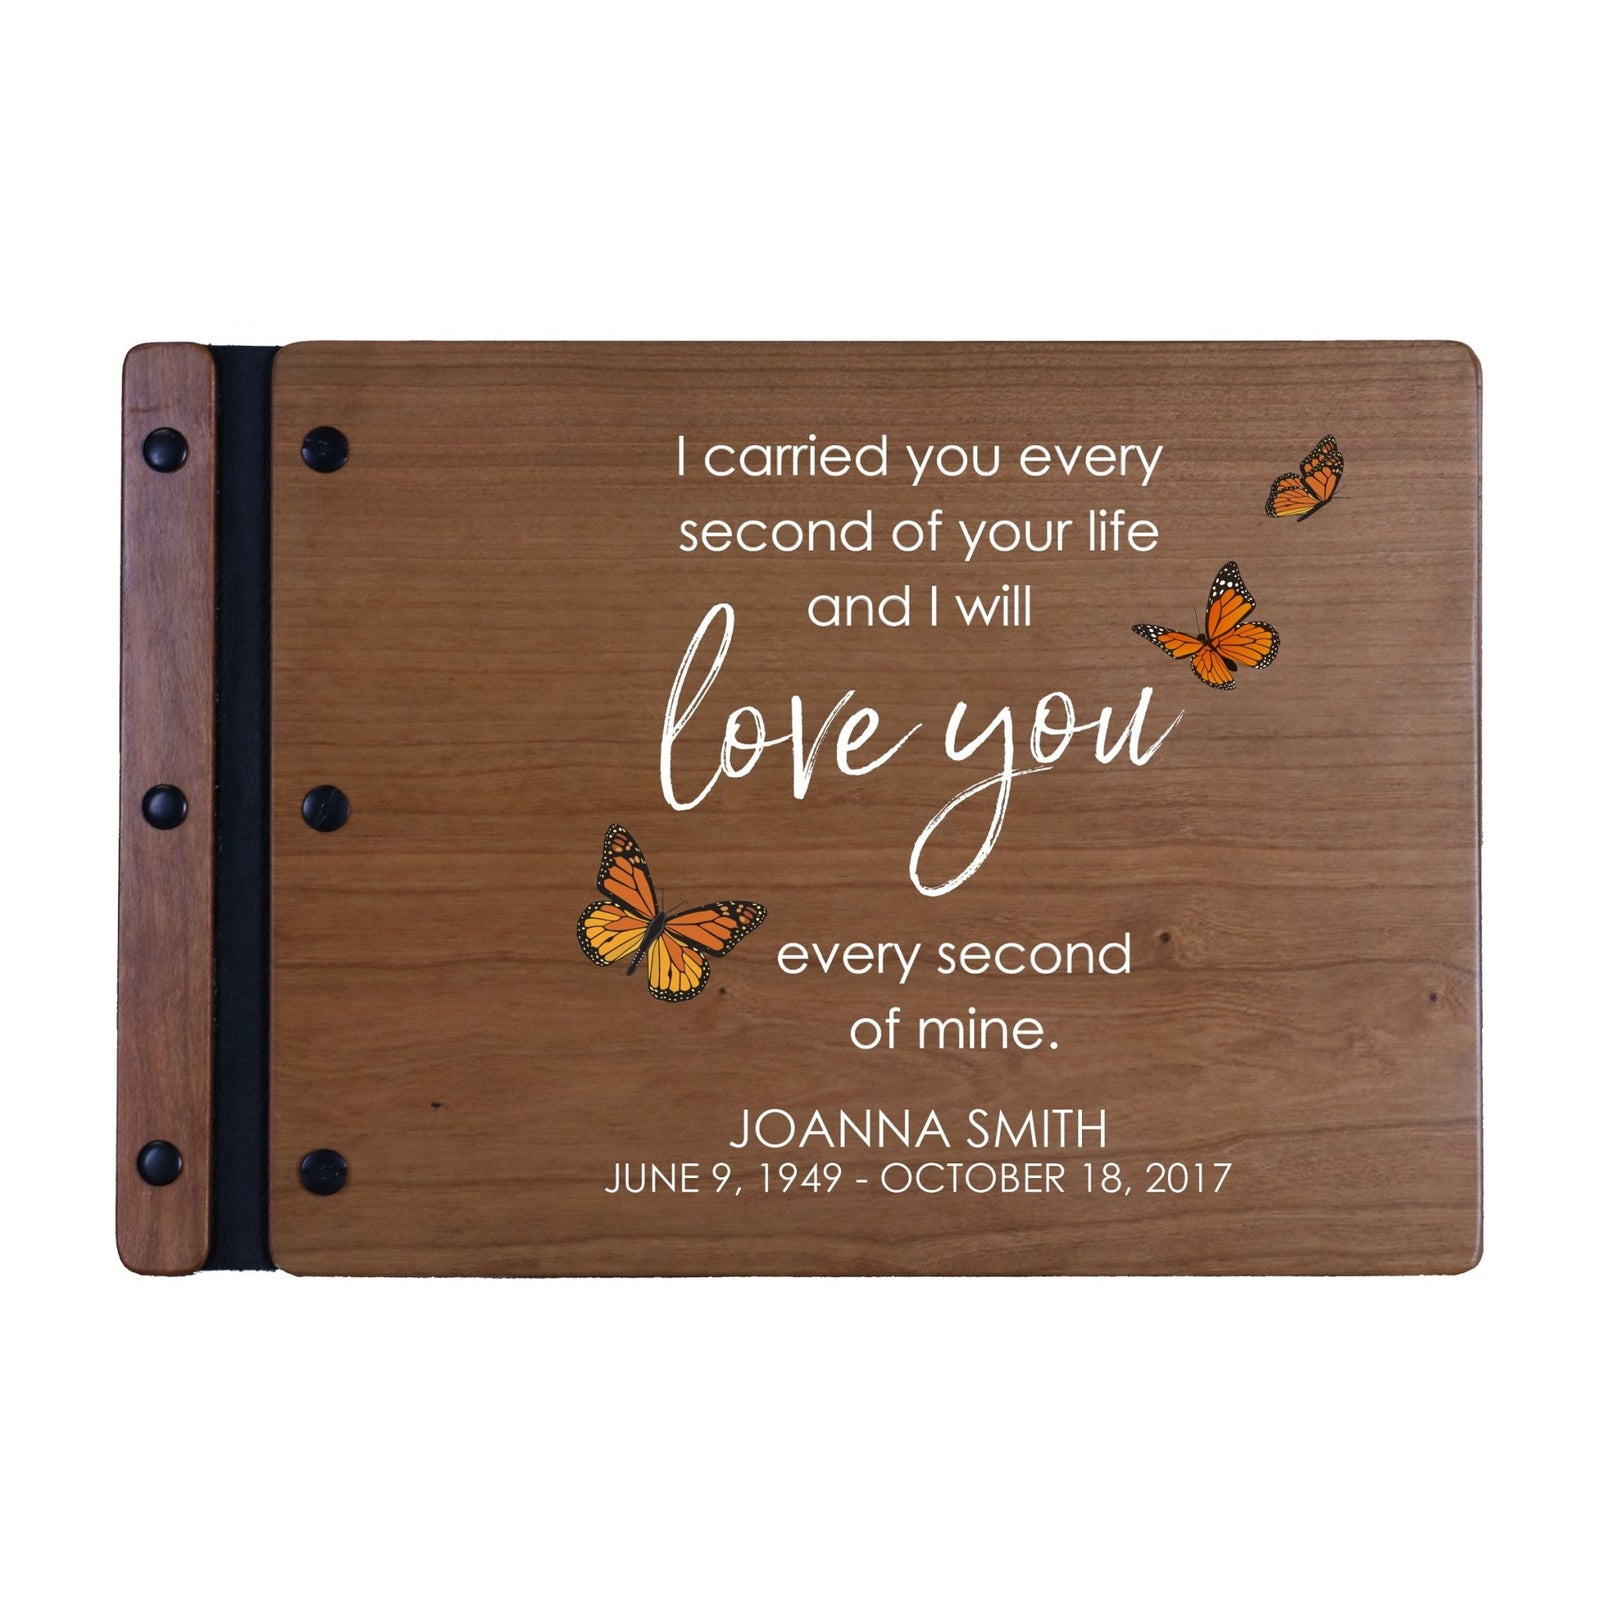 Personalized Medium Wooden Memorial Guestbook 12.375x8.5 - I Carried You - LifeSong Milestones